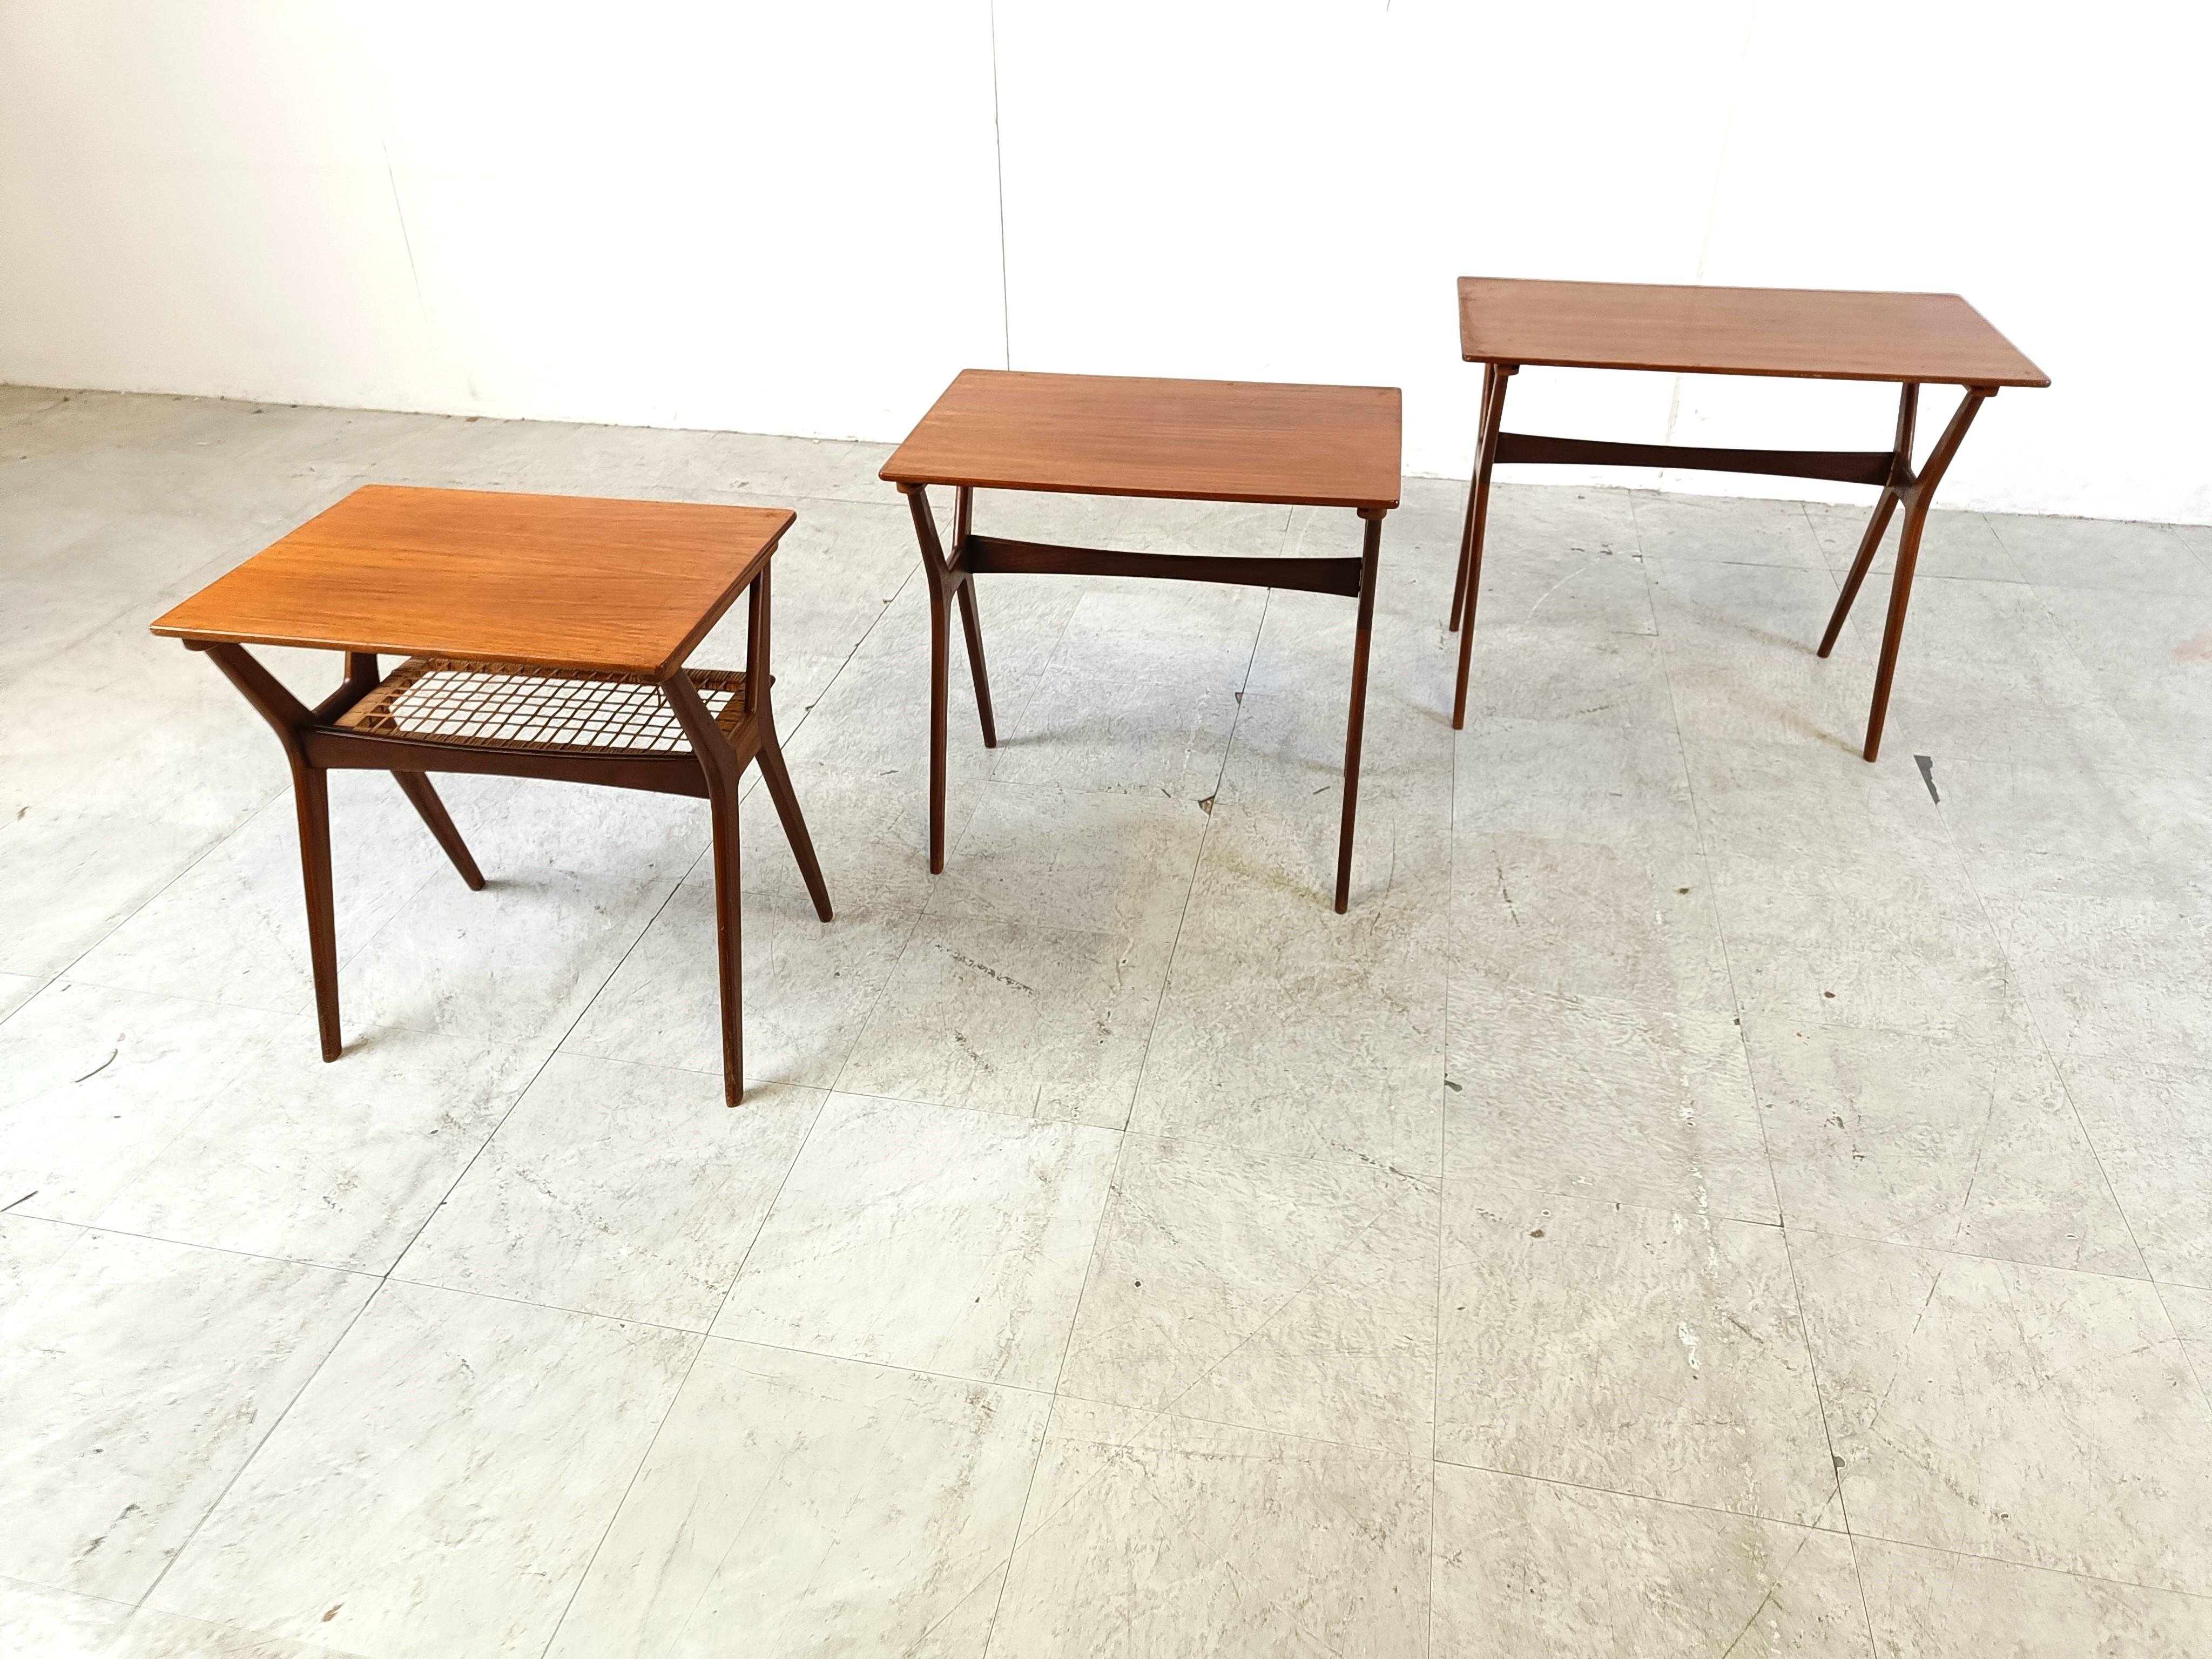 Mid century teak nesting tables by Johannes Andersen for Silkeborg Mobelfabrik.

The tables perfectly slide into each other forming a beautiful nest of tables.

The lowest table has a cane webbing lower tier.

Very good condition

1960s -